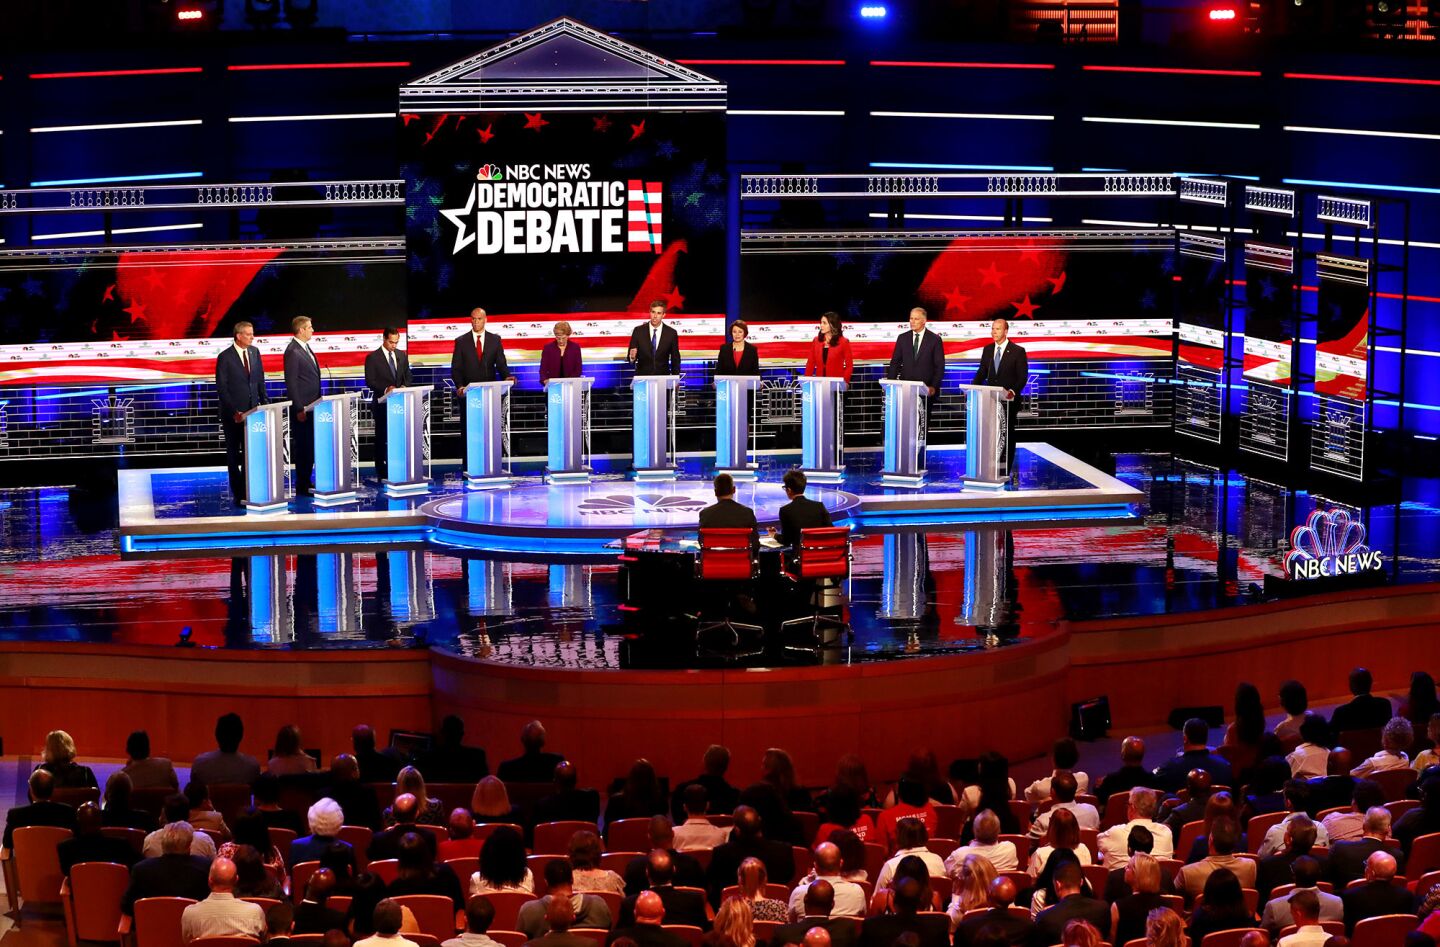 Democratic presidential candidates from left, New York City Mayor Bill de Blasio, Rep. Tim Ryan, D-Ohio, former Housing and Urban Development Secretary Julian Castro, Sen. Cory Booker, D-N.J., Sen. Elizabeth Warren, D-Mass., former Texas Rep. Beto OíRourke, Sen. Amy Klobuchar, D-Minn., Rep. Tulsi Gabbard, D-Hawaii, Washington Gov. Jay Inslee, and former Maryland Rep. John Delaney listen to a question during the Democratic primary debate hosted by NBC News at the Adrienne Arsht Center for the Performing Arts, Wednesday, June 26, 2019, in Miami.